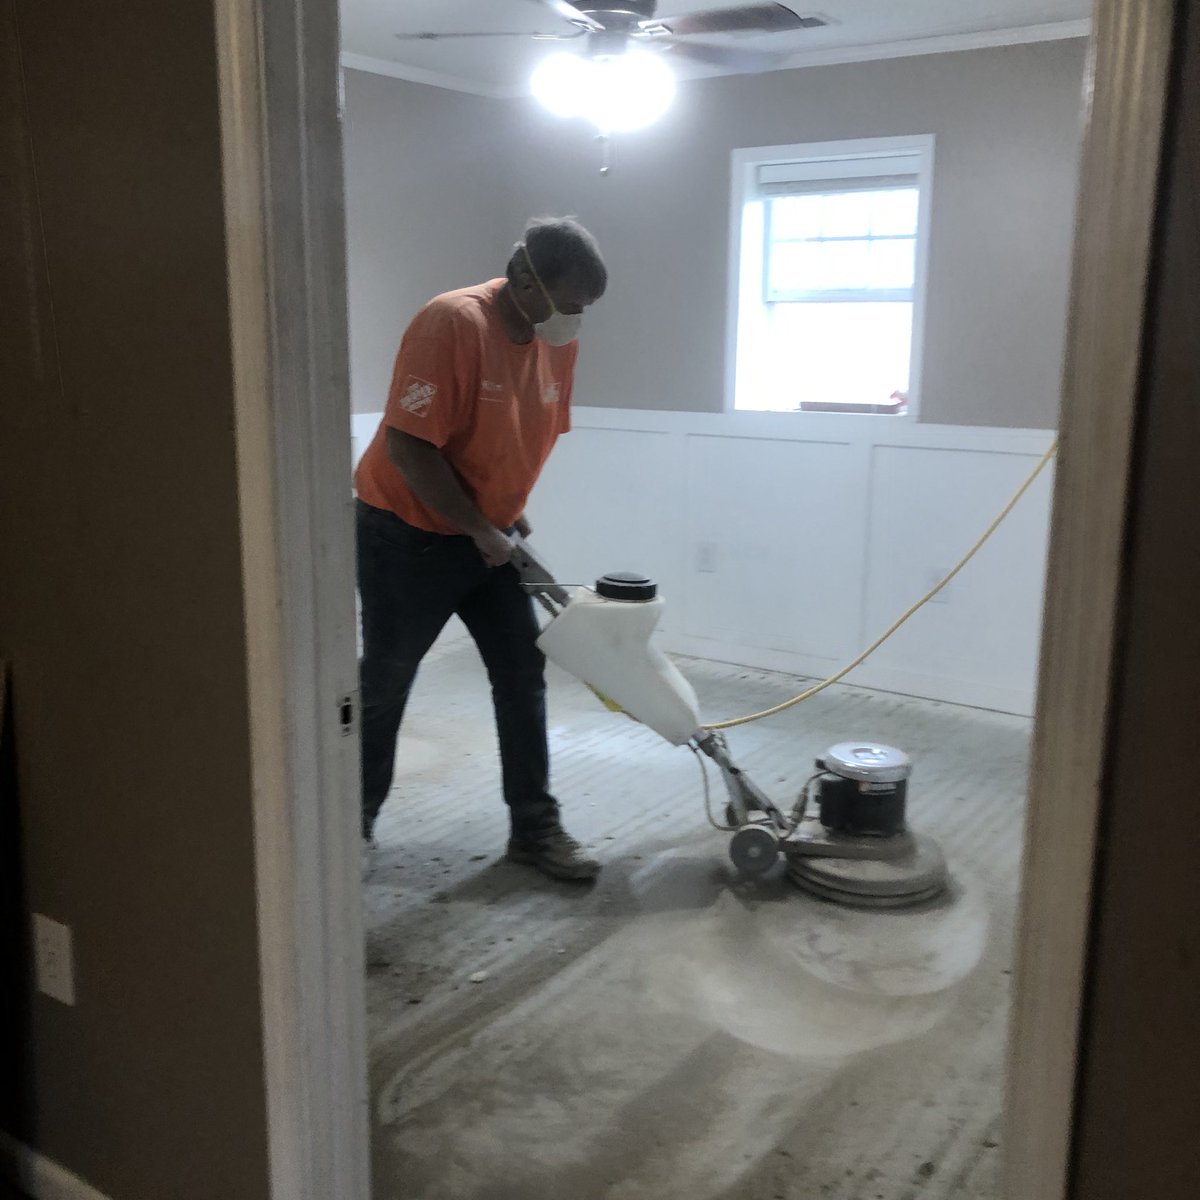 Team Depot working hard to help the local fire department renovate. We love giving back to our community. #DoingOurPart @hollytate122 @serenegar @BrianETHD @FredBrownHD @Ben_Heinze